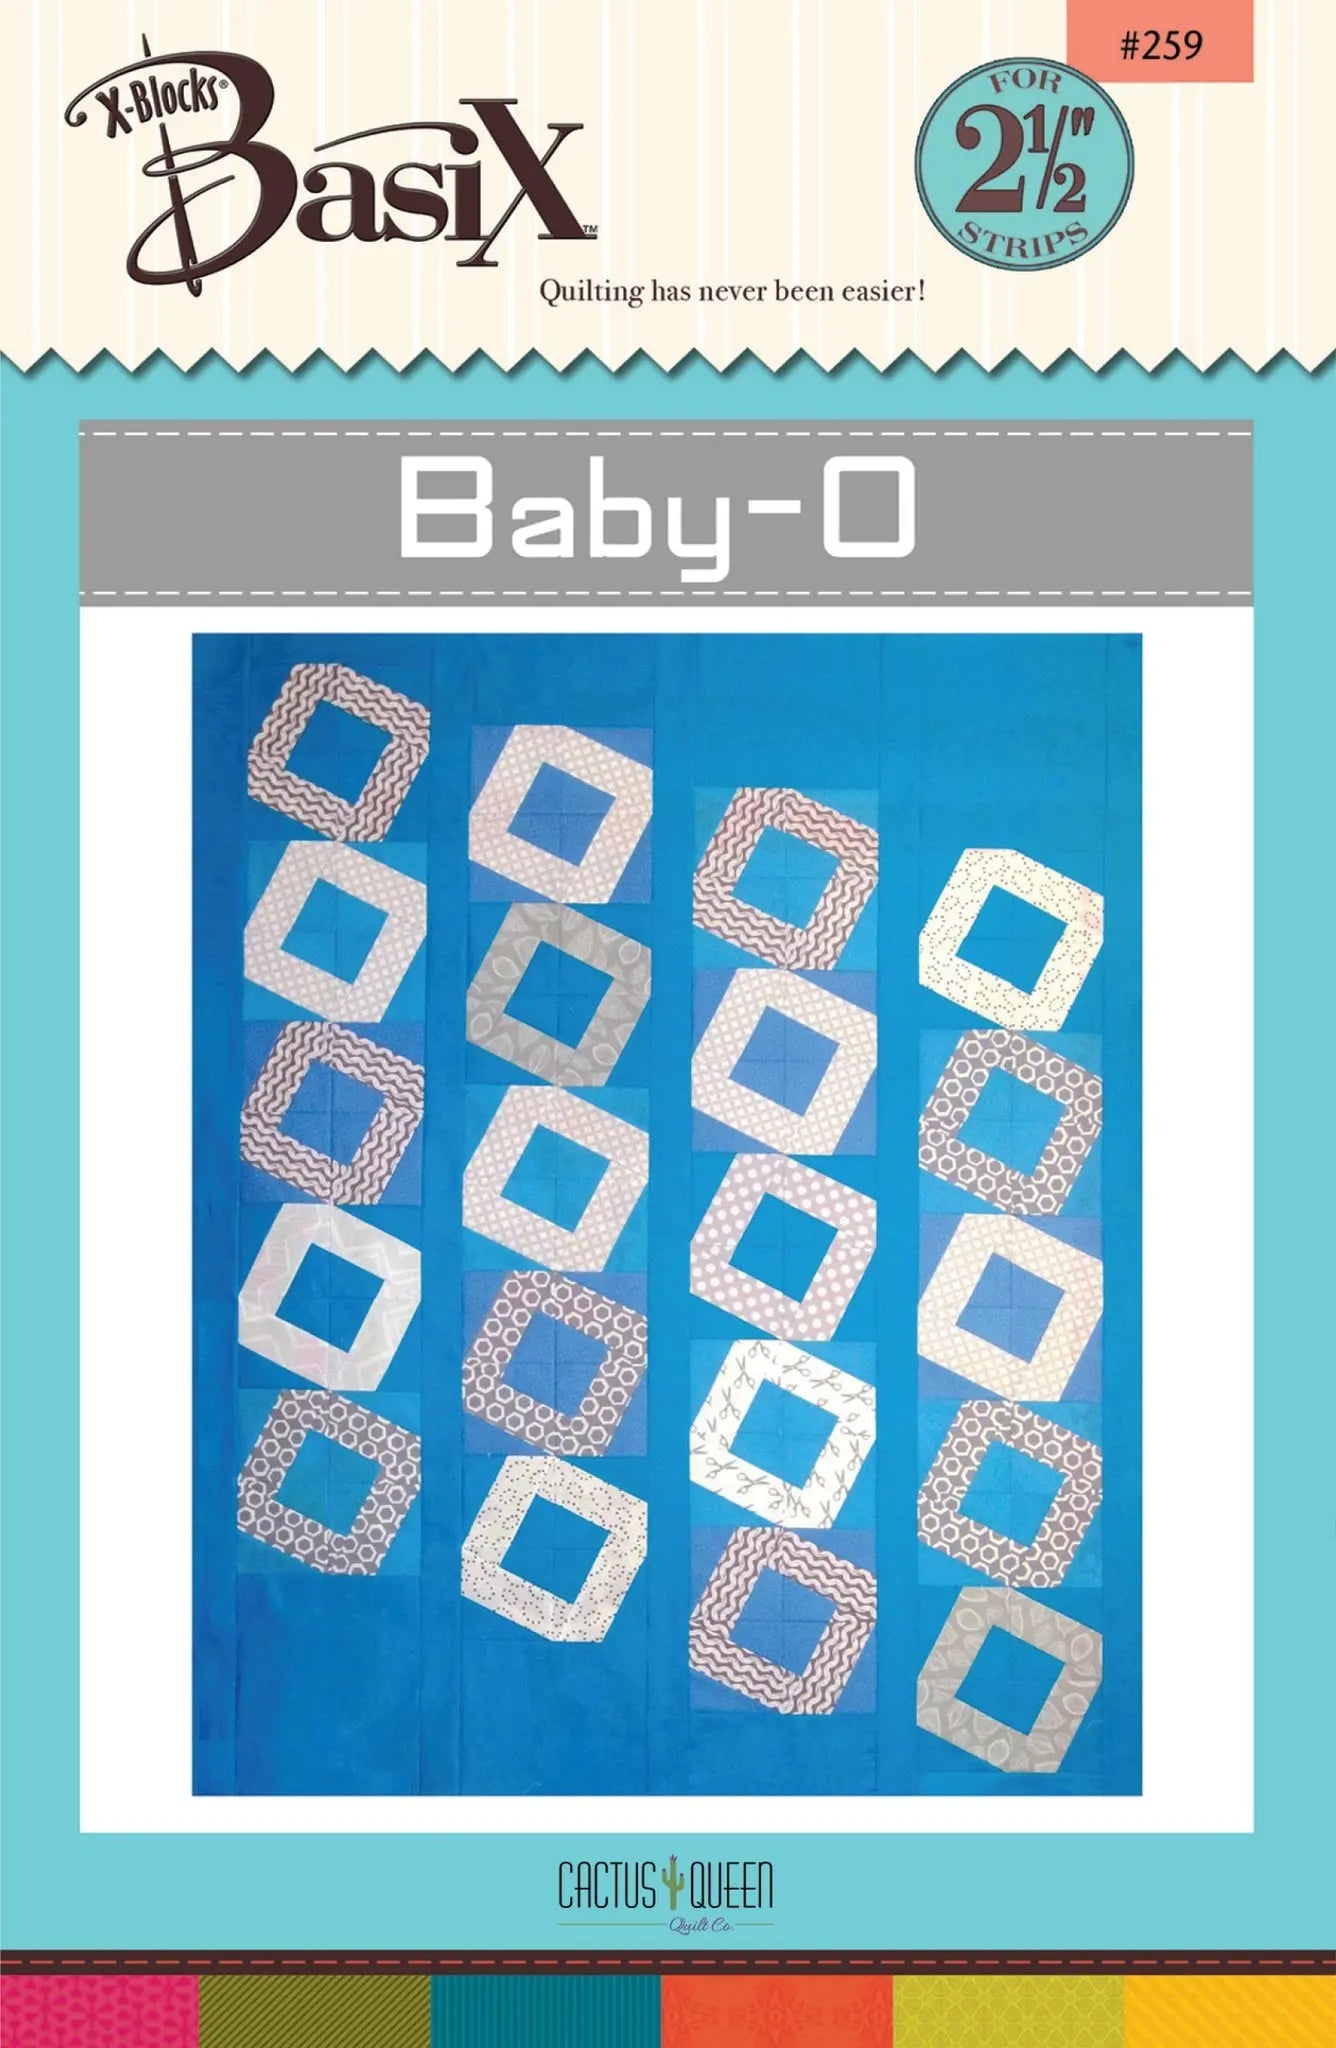 BasiX Baby-O Pattern - Linda's Electric Quilters